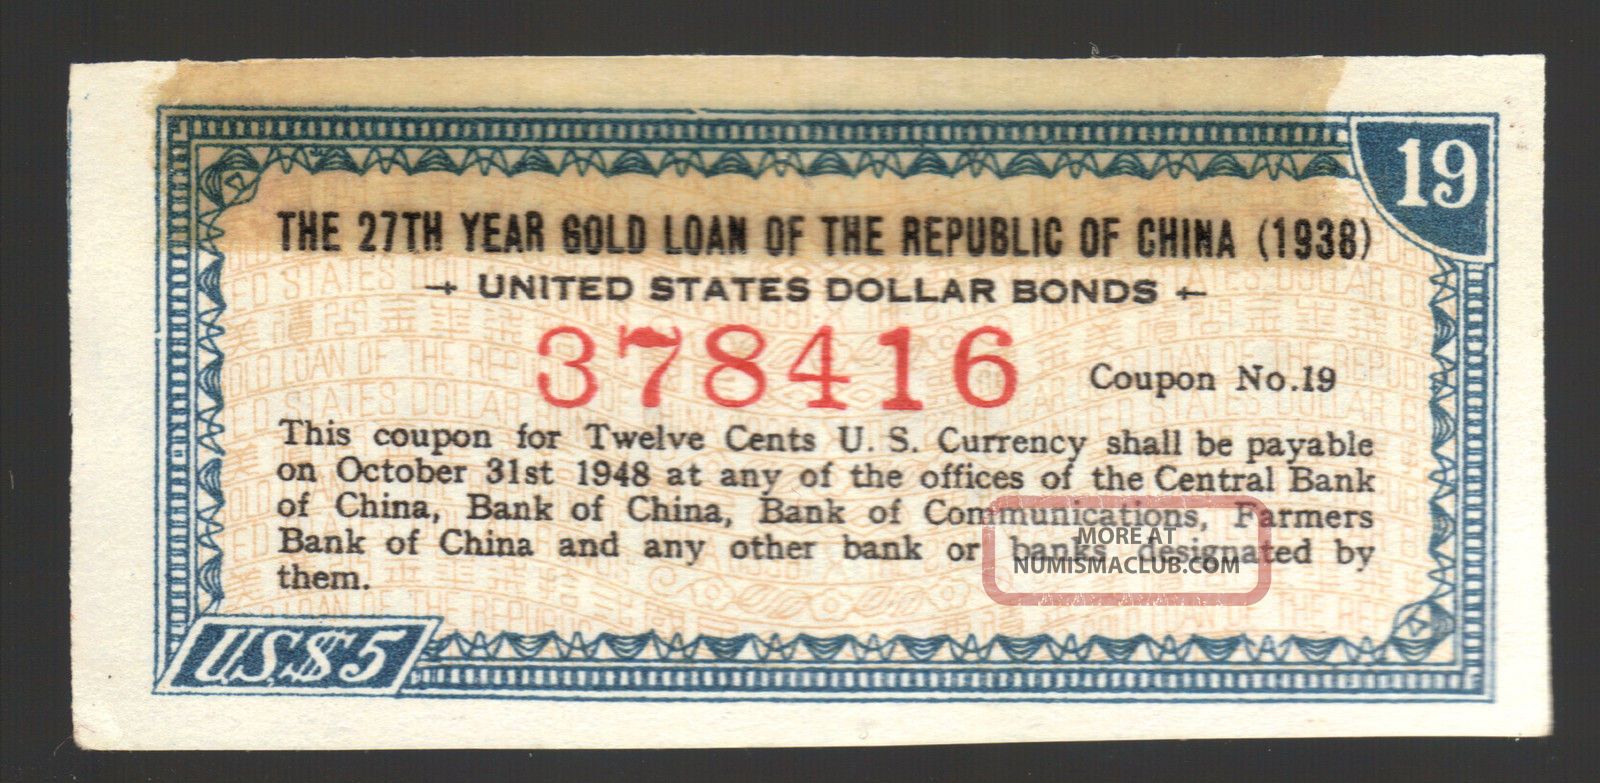 $5 27th Year Gold Loan 1938 Republic Of China United States Dollar Bond Coupon Small Size Notes photo